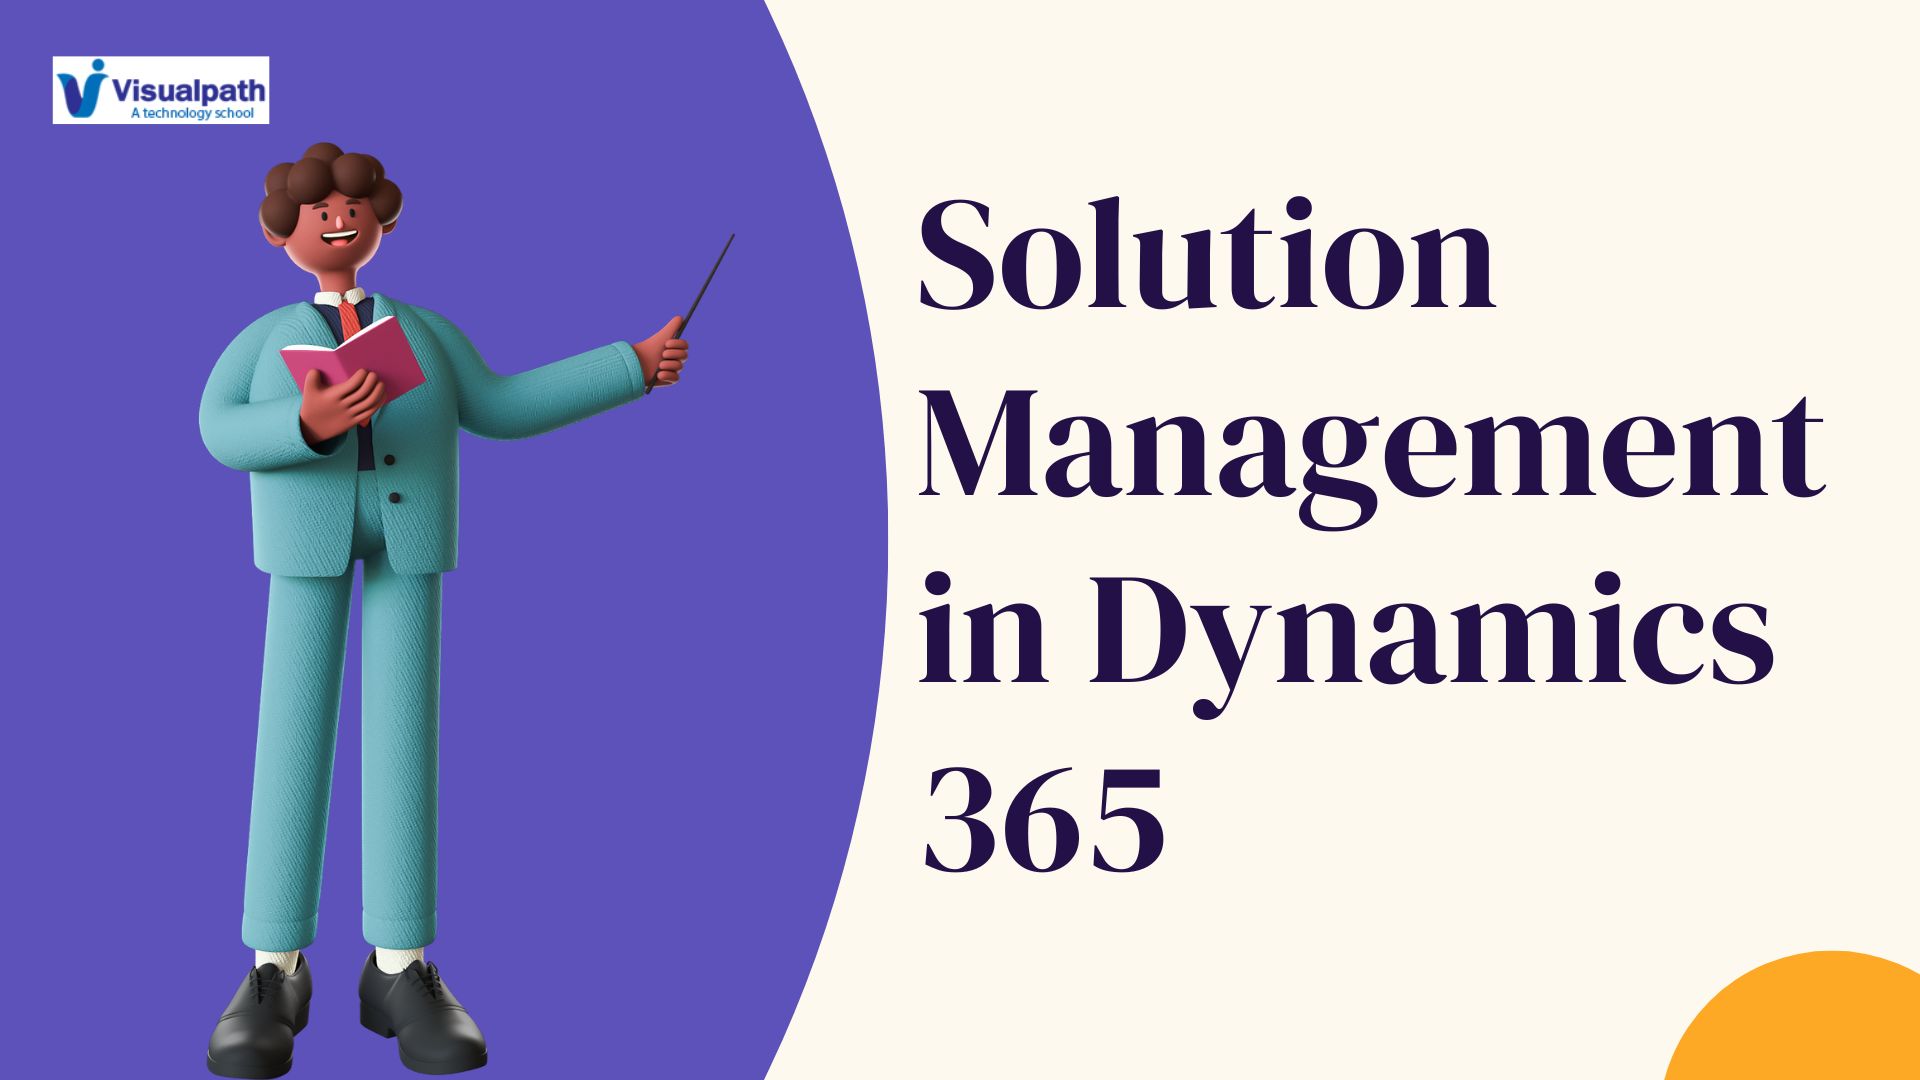 Solution Management in Dynamics 365